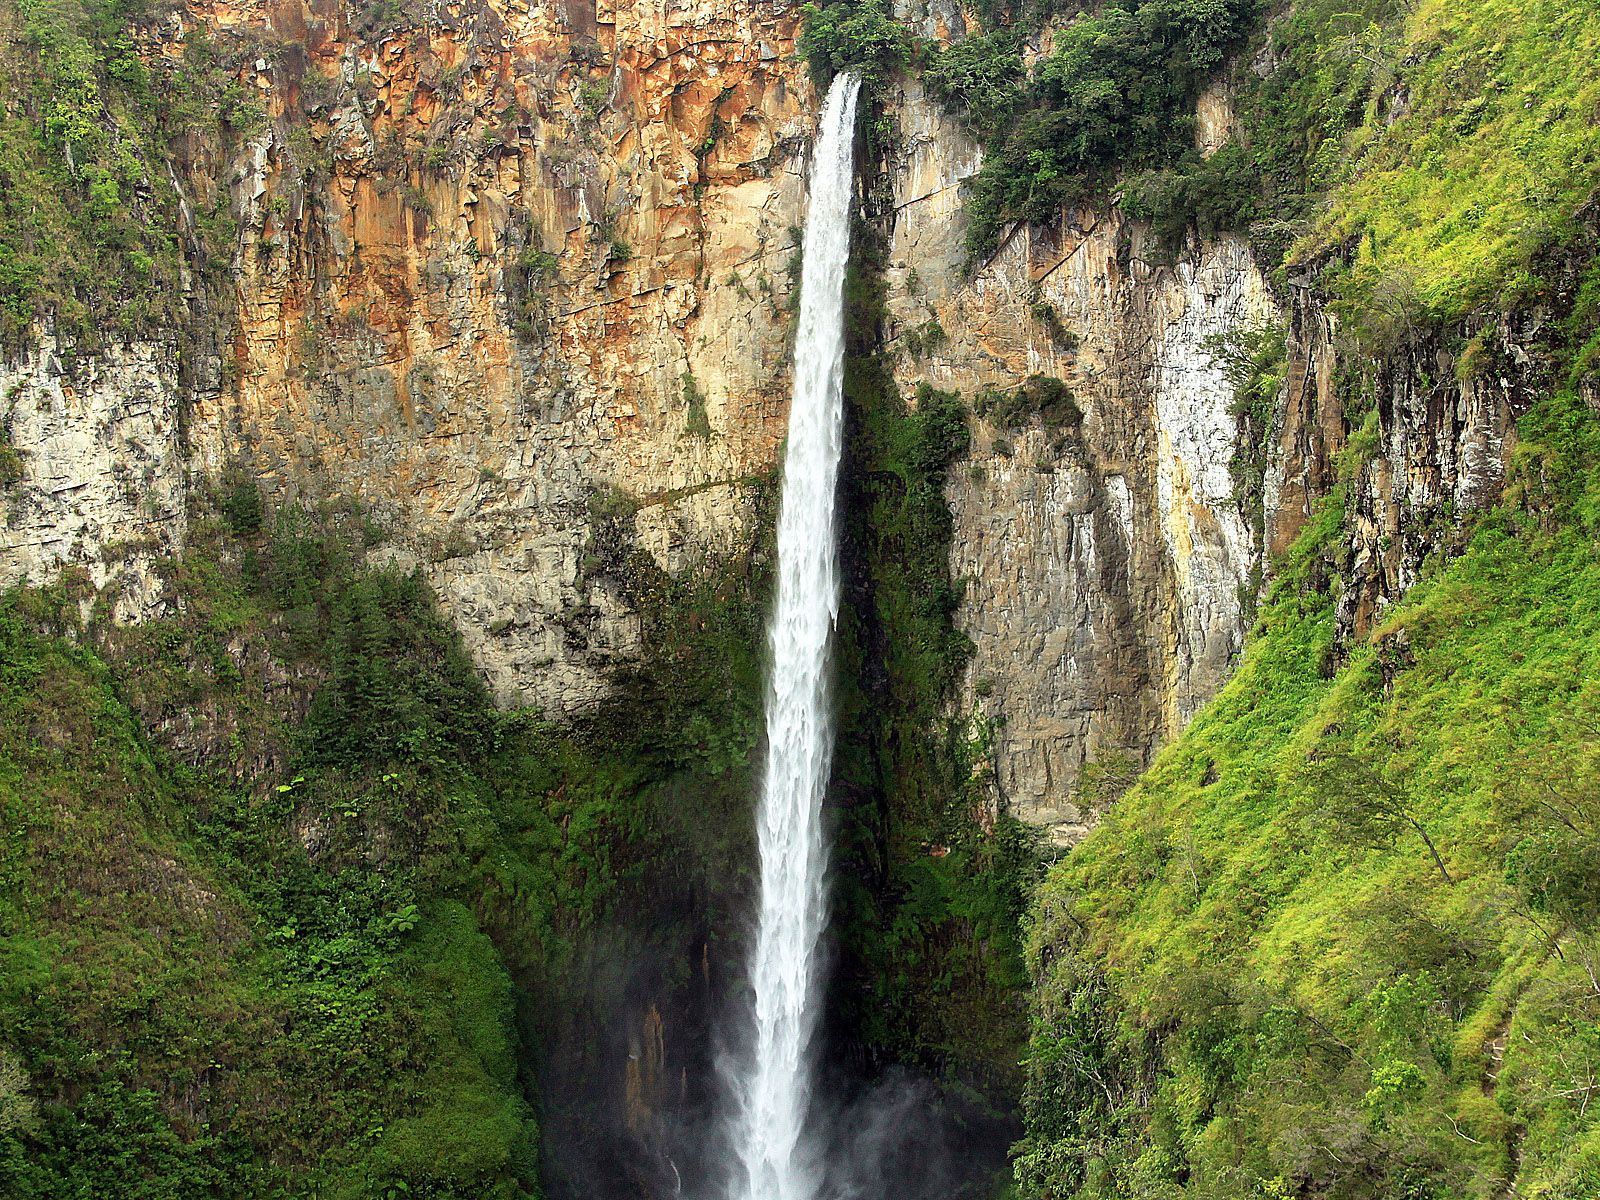 Download this Sipisopiso Waterfall picture